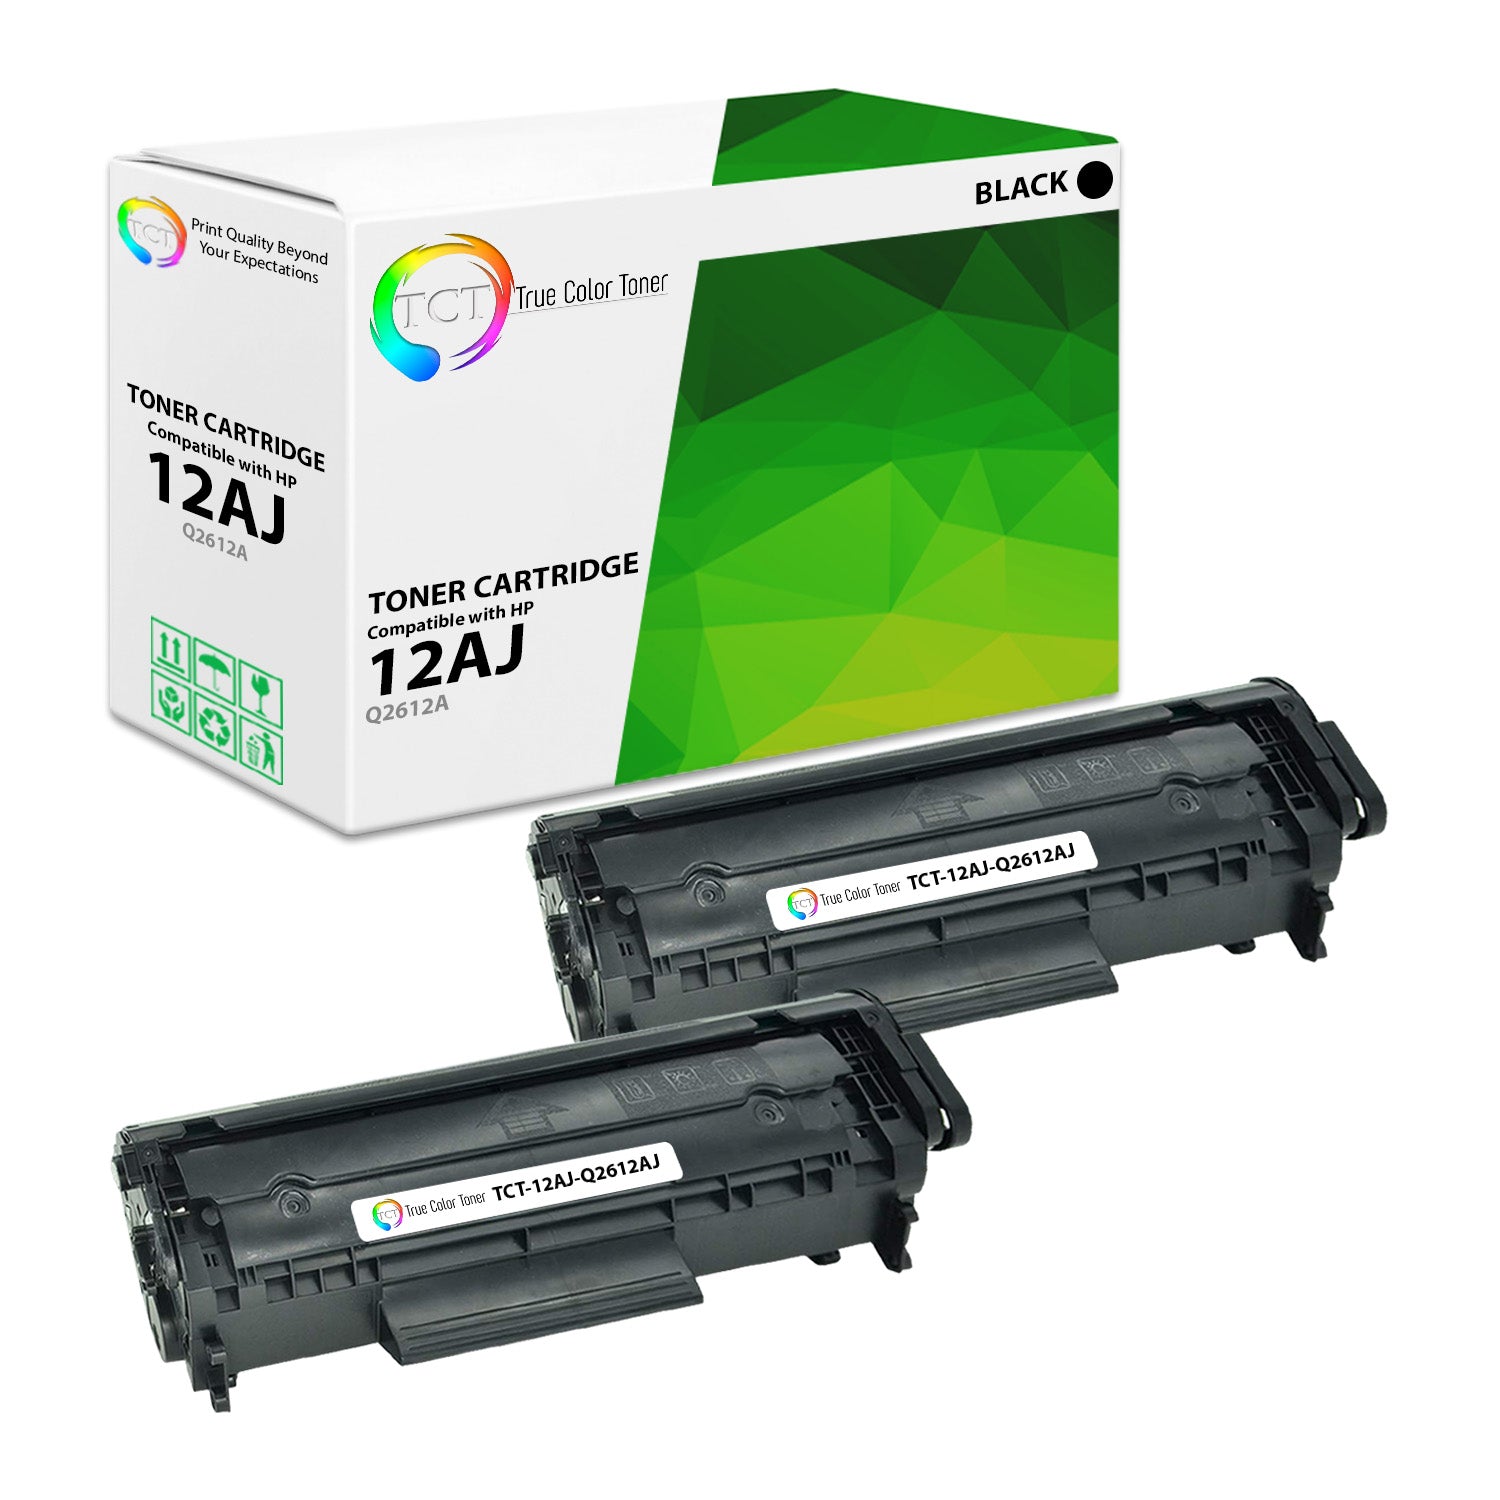 TCT Compatible Jumbo Toner Cartridge Replacement for the HP 12AJ Series - 2 Pack Black